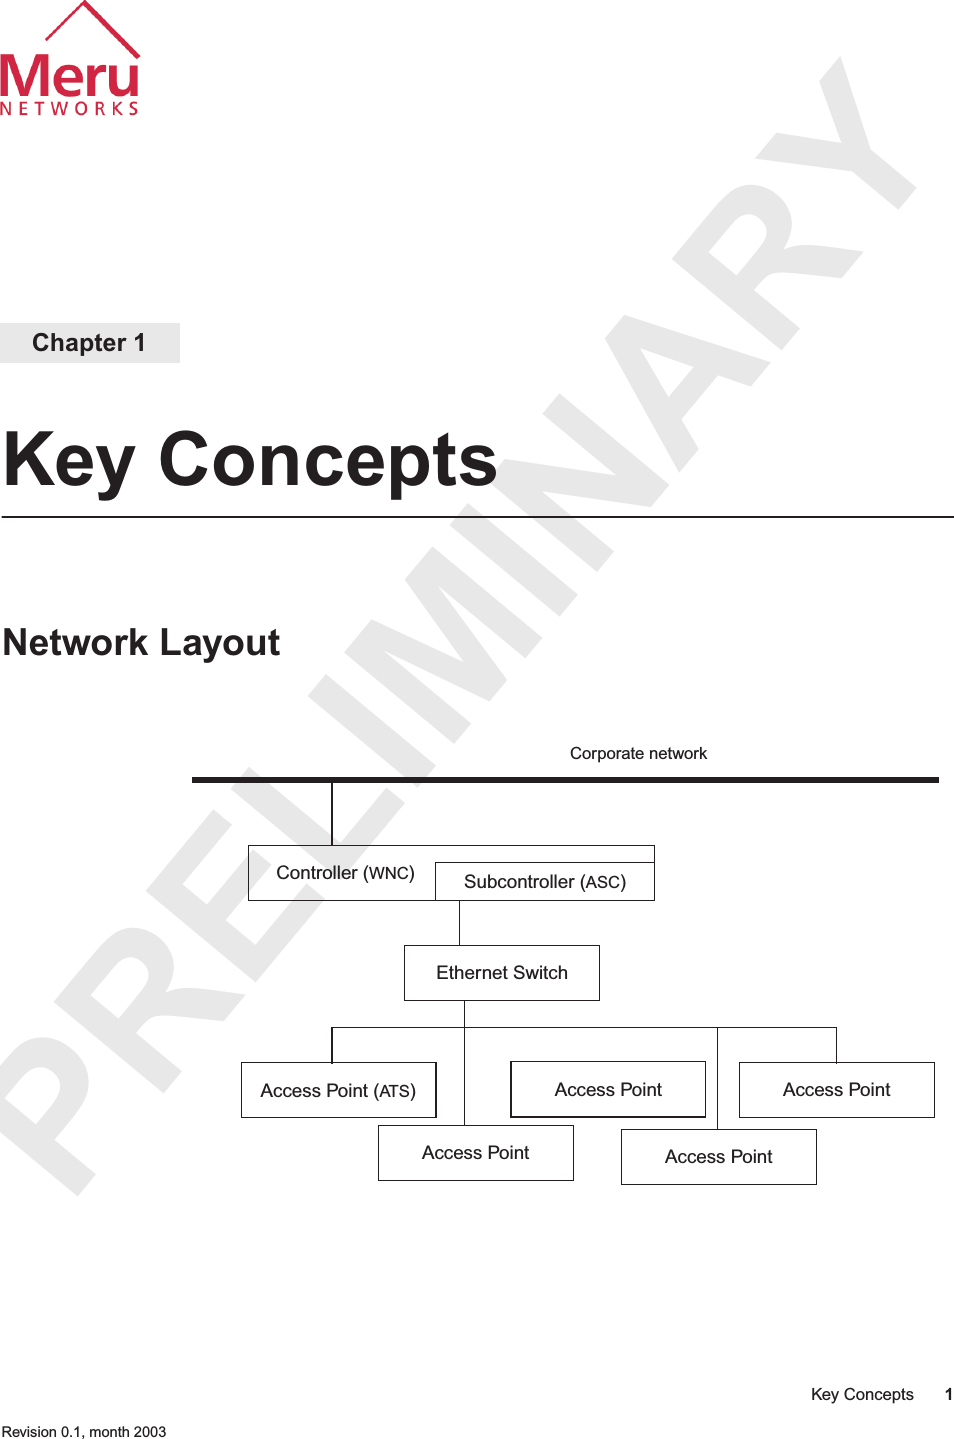 PRELIMINARYKey Concepts 1 Revision 0.1, month 2003Chapter 1Key ConceptsNetwork LayoutController (WNC)Ethernet SwitchAccess Point (ATS )Access PointAccess PointAccess PointAccess PointCorporate networkSubcontroller (ASC)